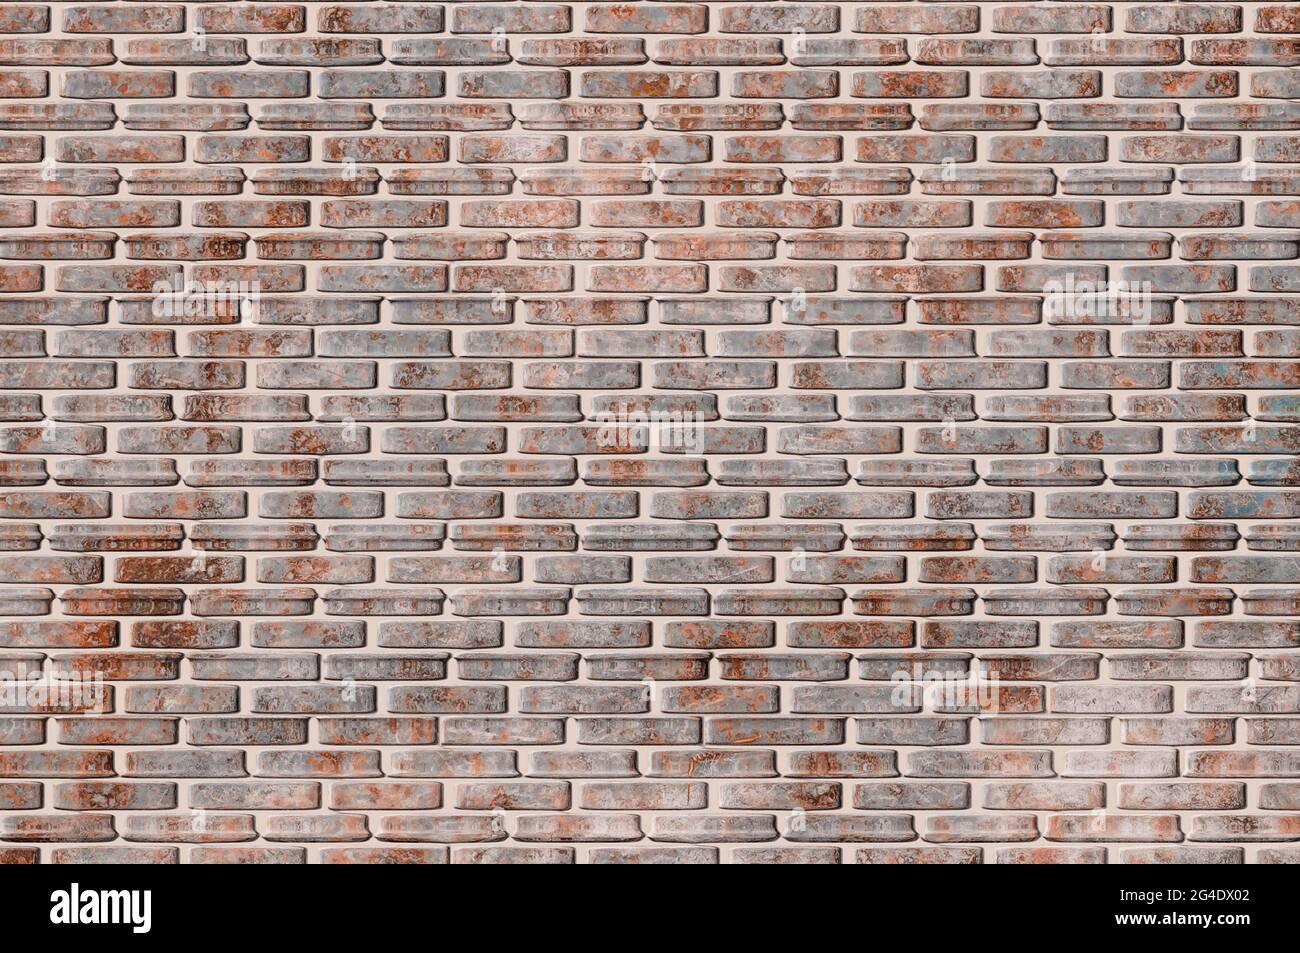 brick wall texture,background for different projects,brick wall,wallpaper,visual effect Stock Photo